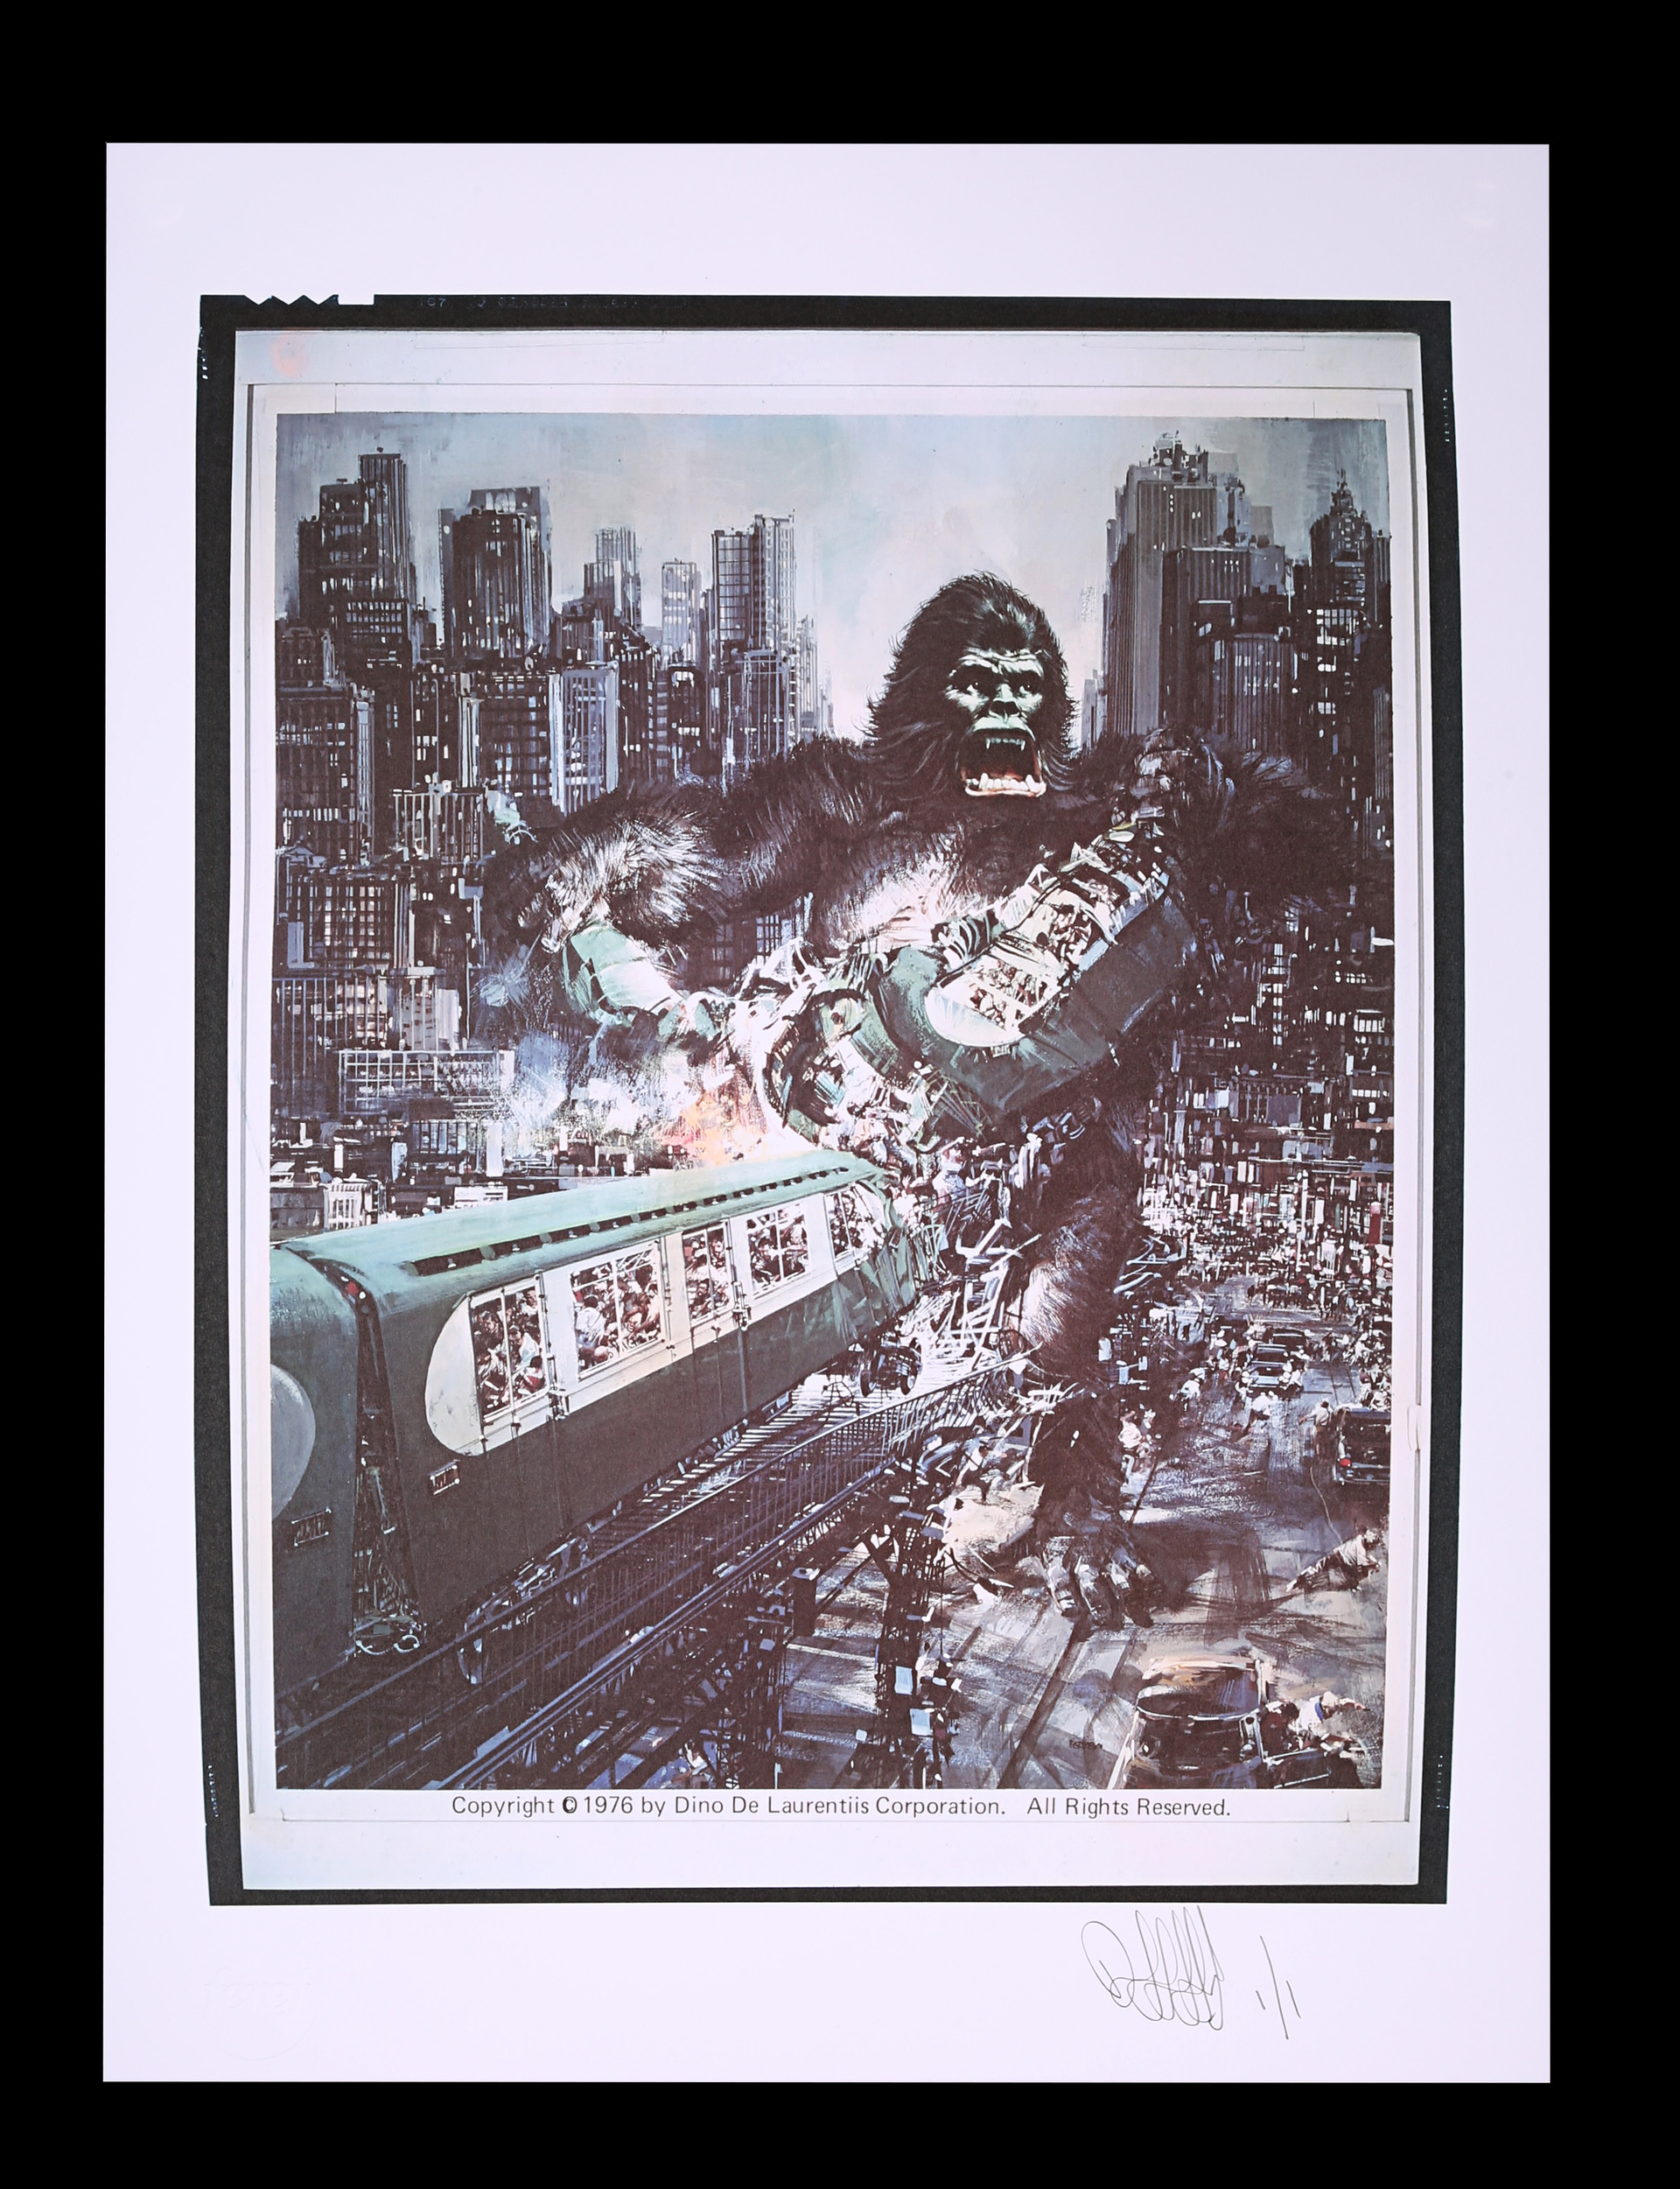 KING KONG (1976) - FEREF ARCHIVE: 1 of 1 Proof Print, with Original Transparencies, Negatives and Fi